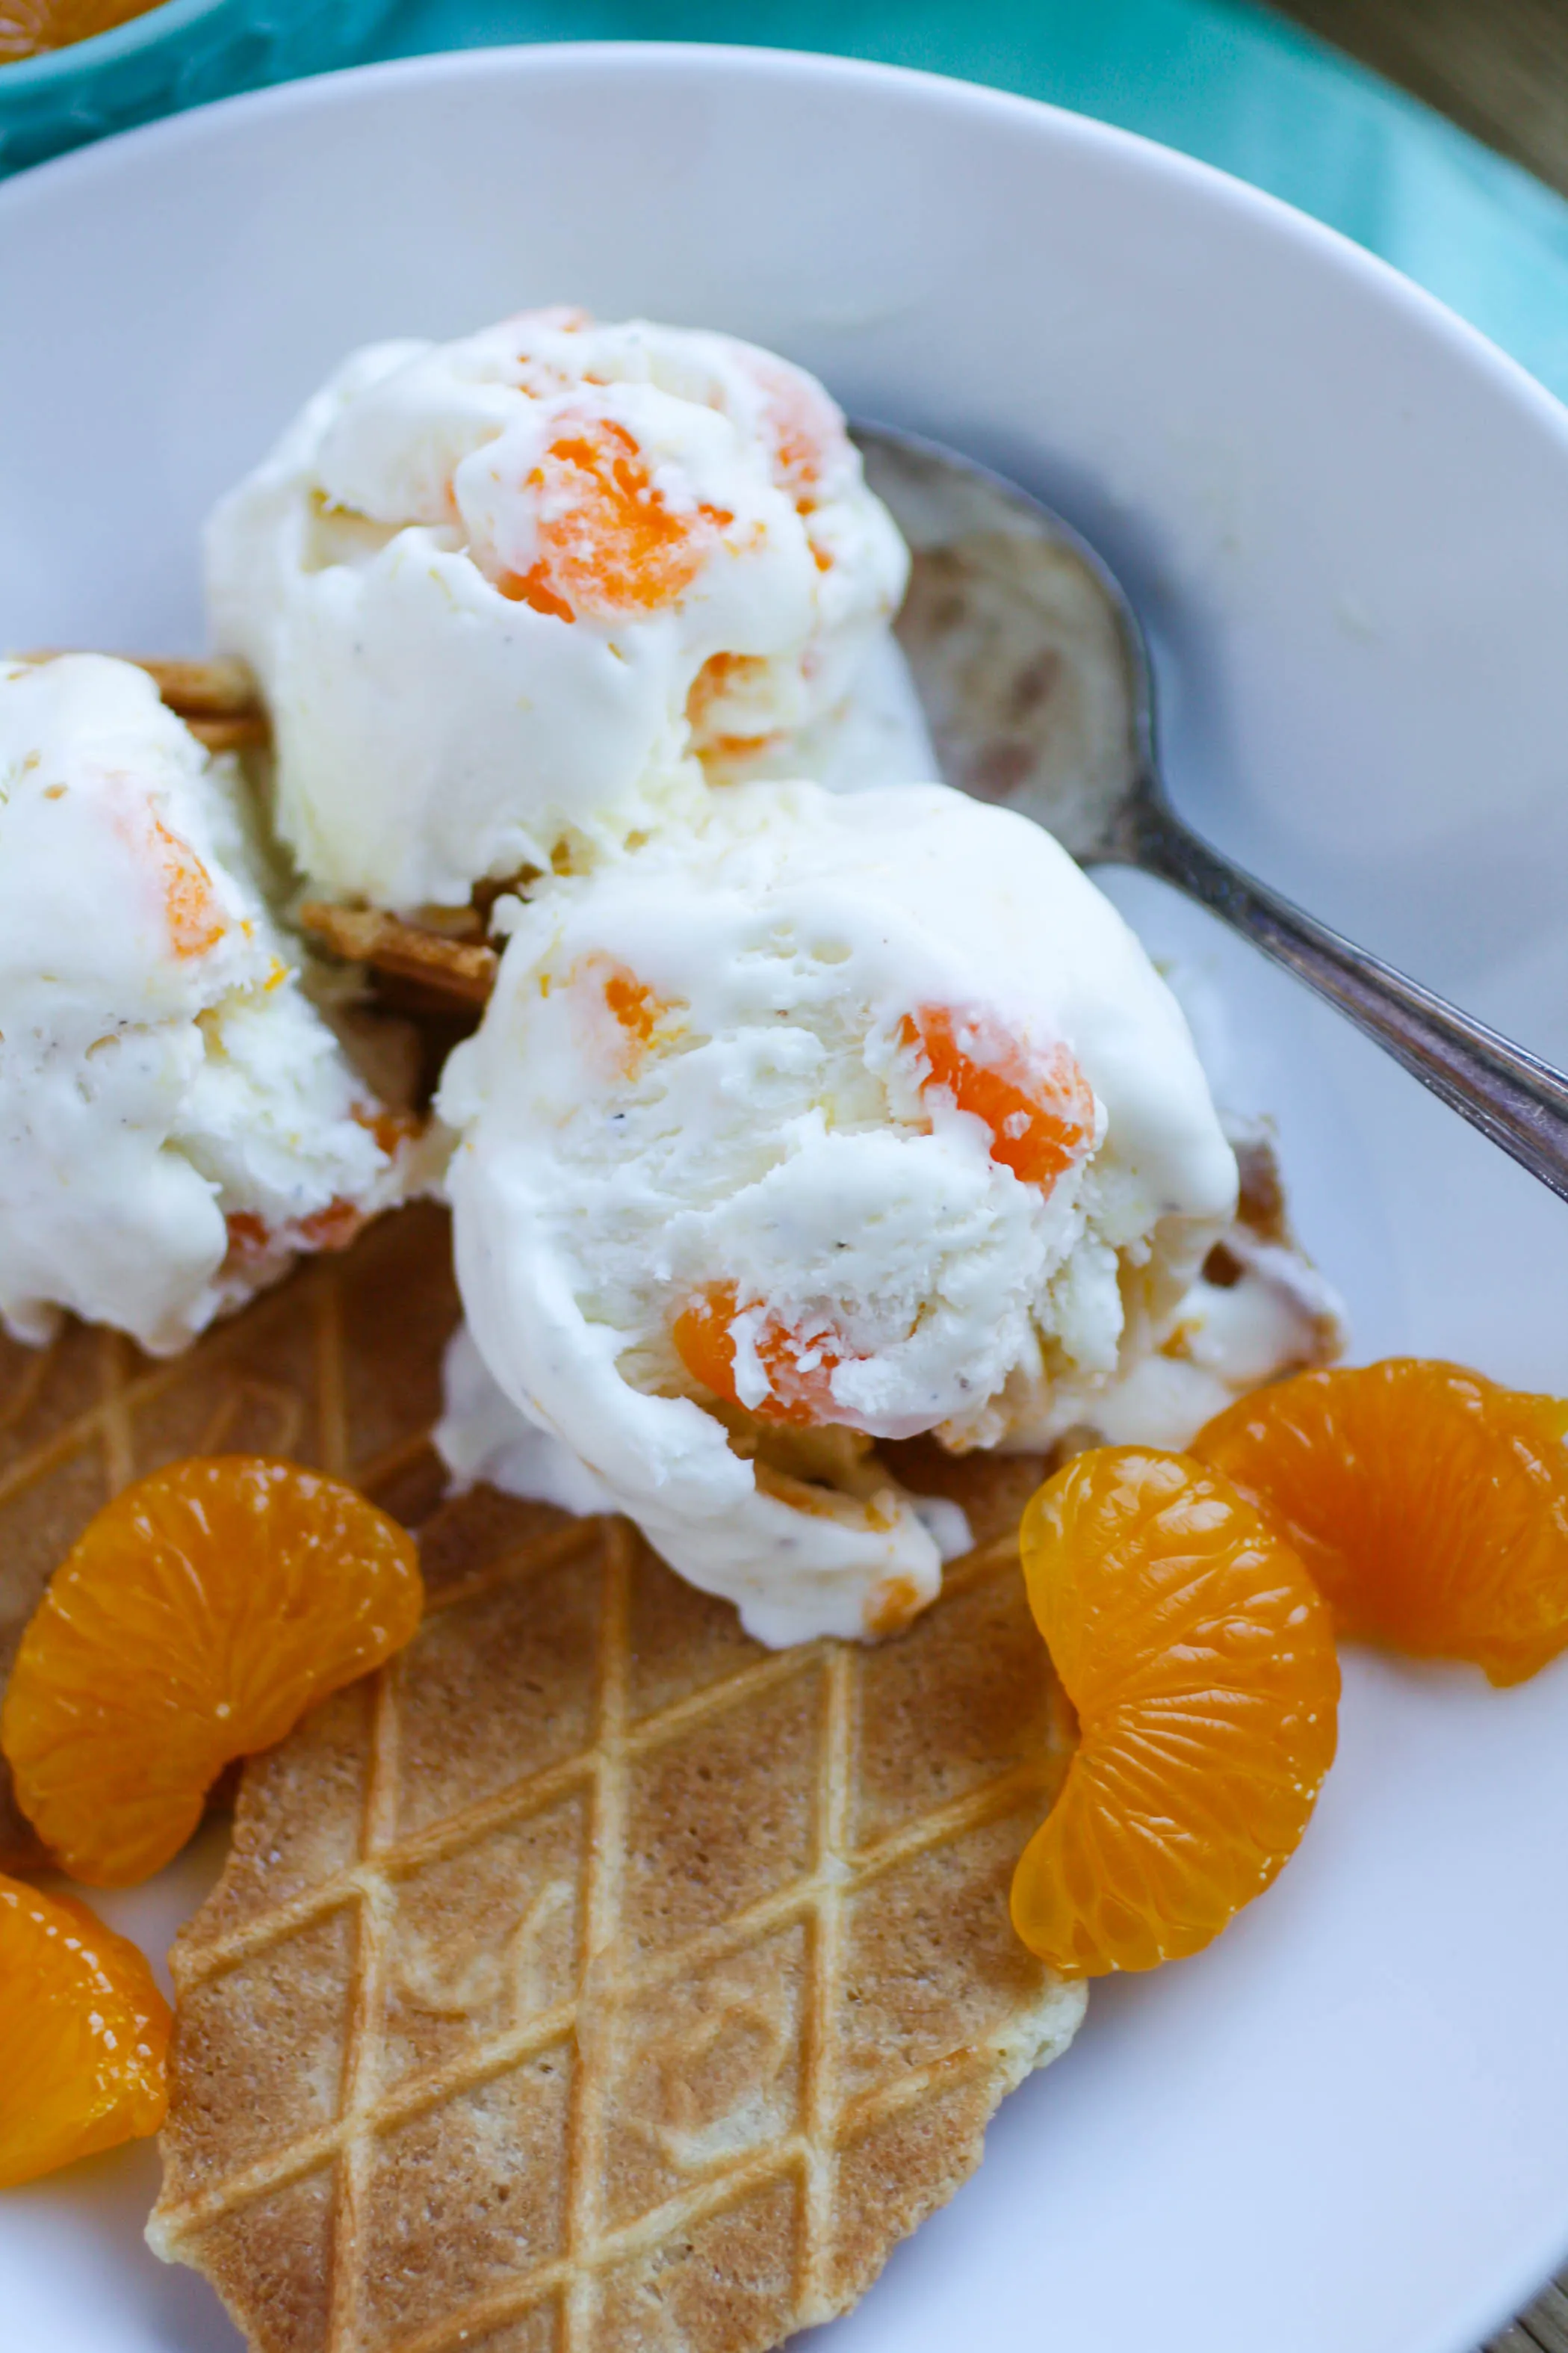 No Churn Orange-Cardamom Ice Cream is a great way to start the weekend! You'll love this tasty and easy-to-make dessert!